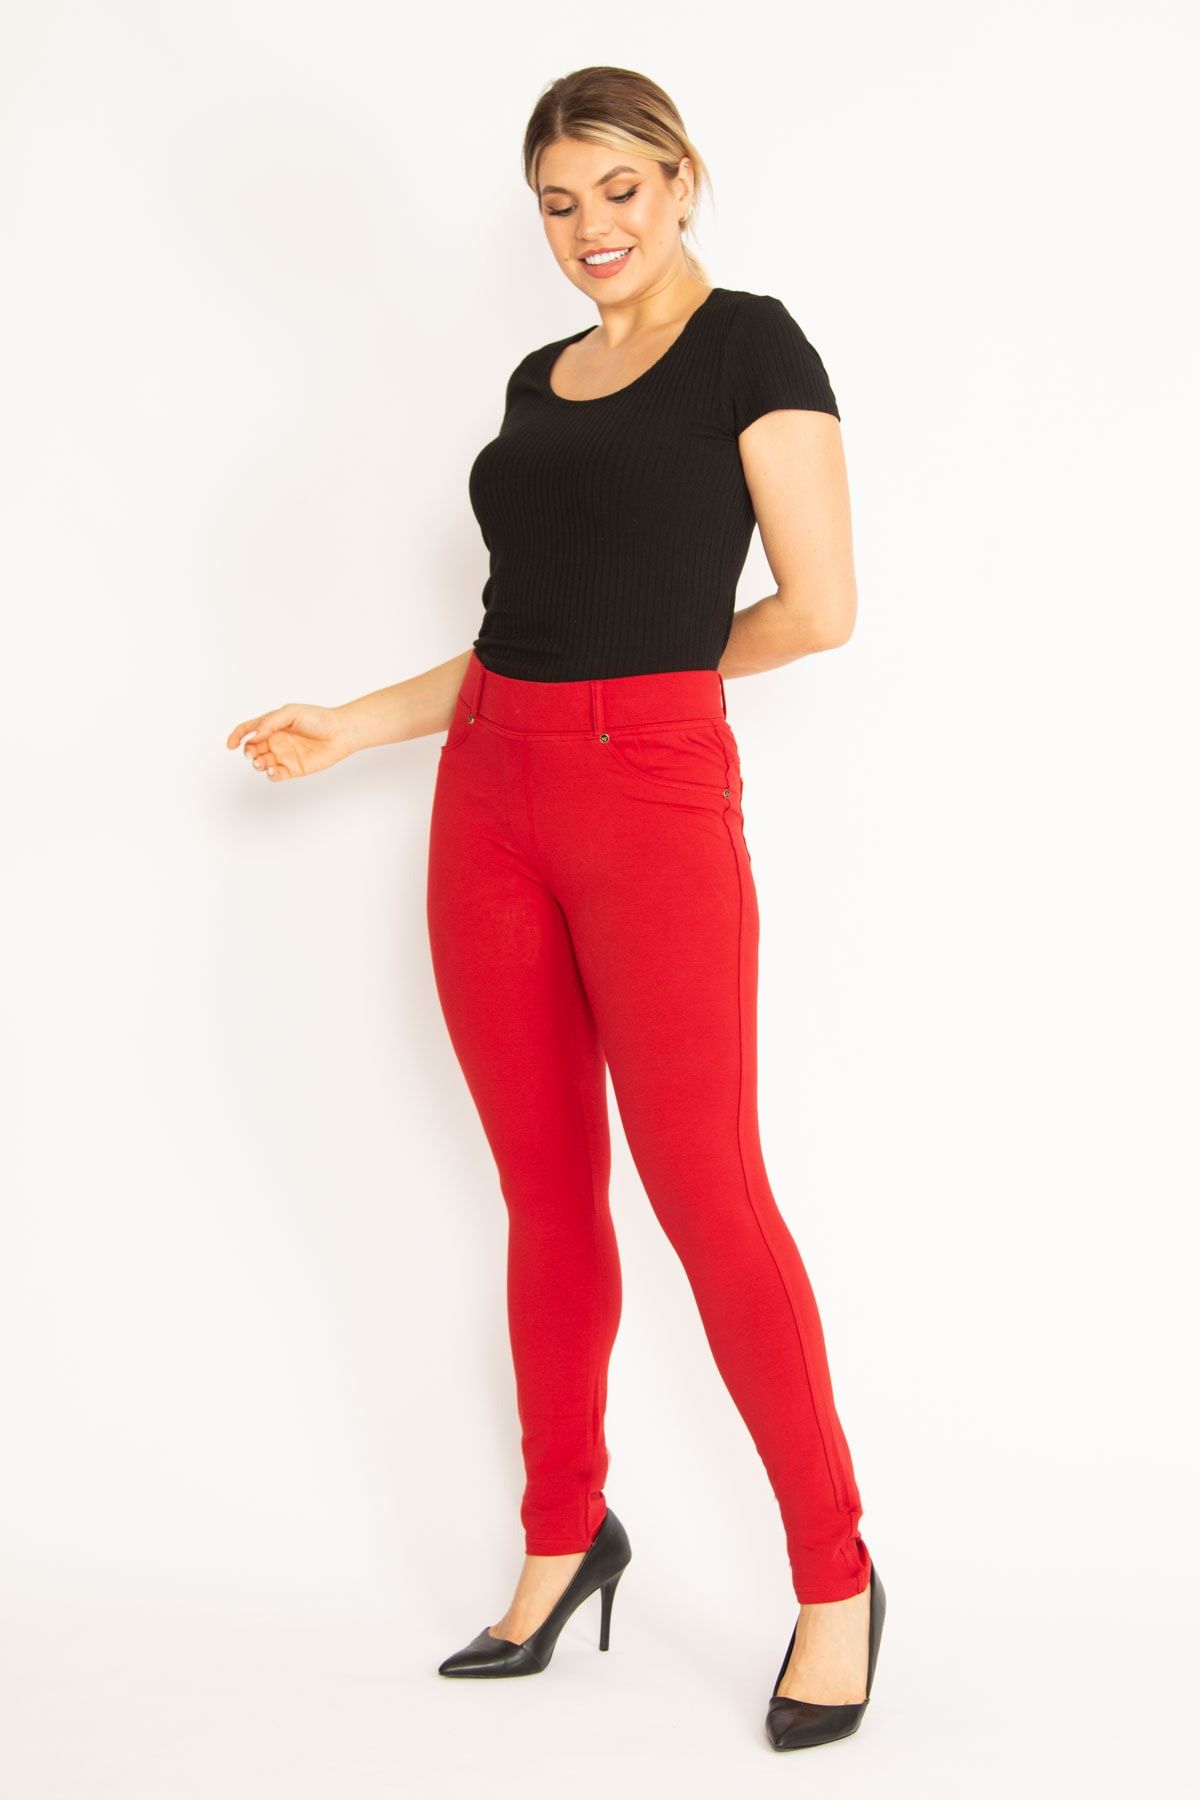 Şans Women's Large Size Red Leggings with Front Decoration and